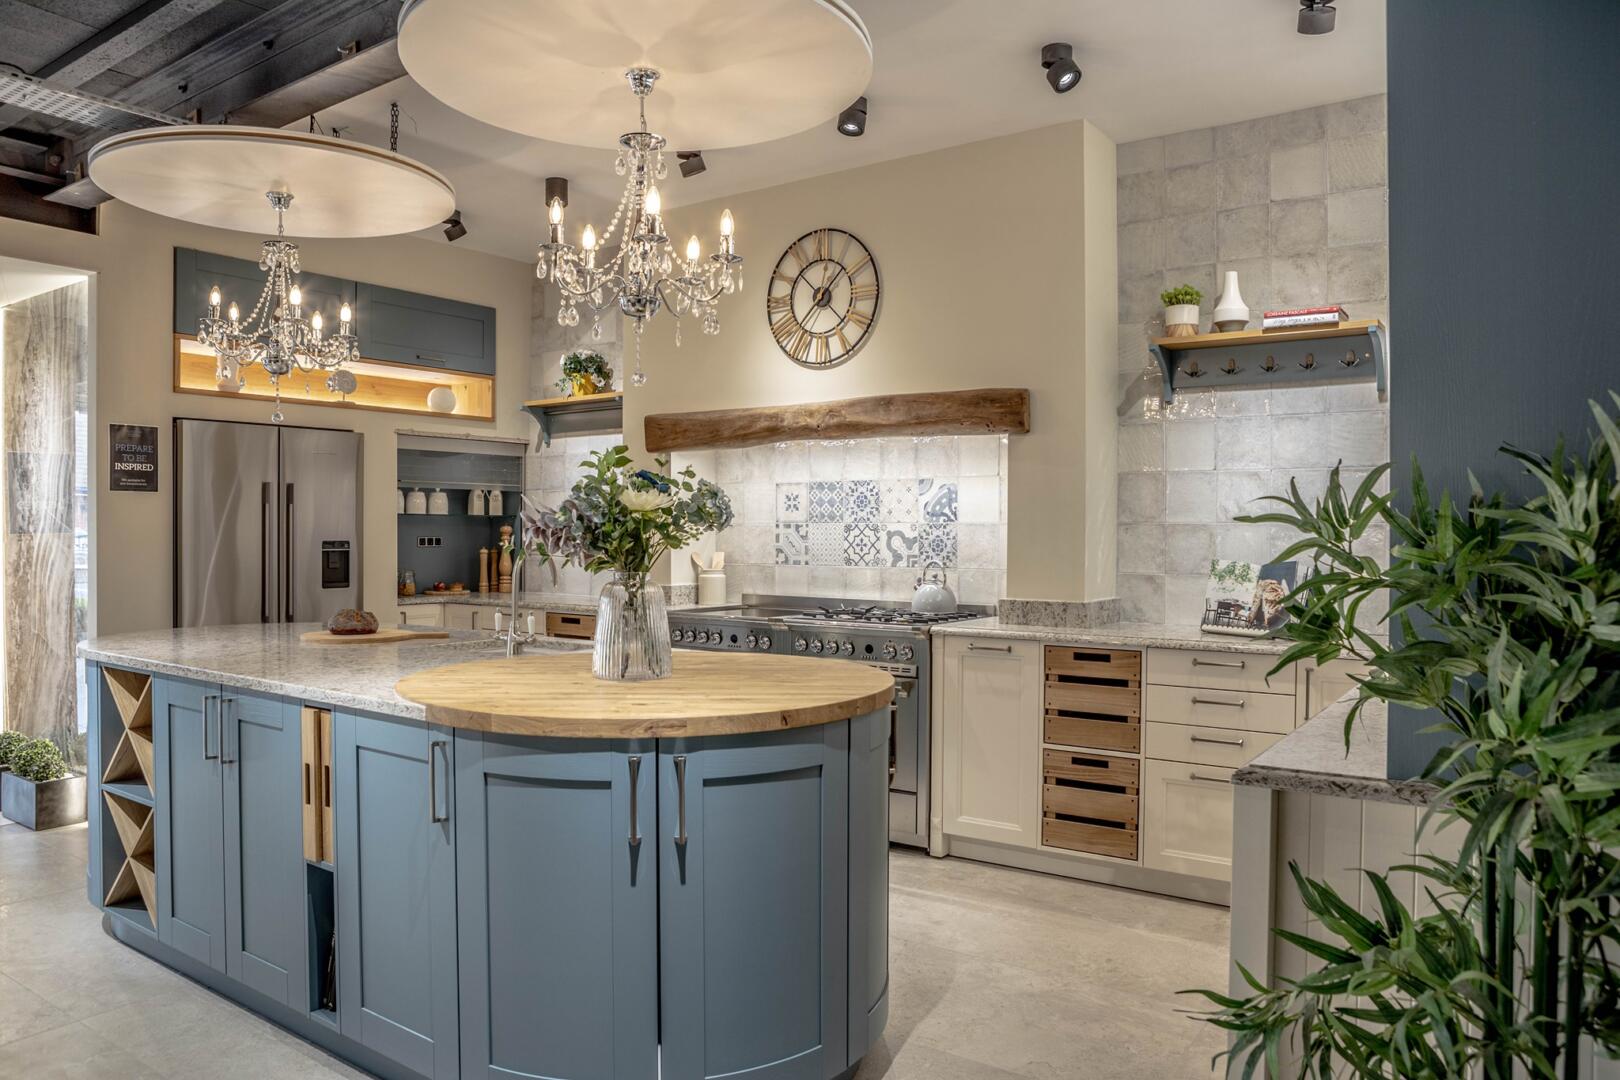 Blue, white, and grey country house kitchen with wooden details in Roccia's Preston kitchen showroom